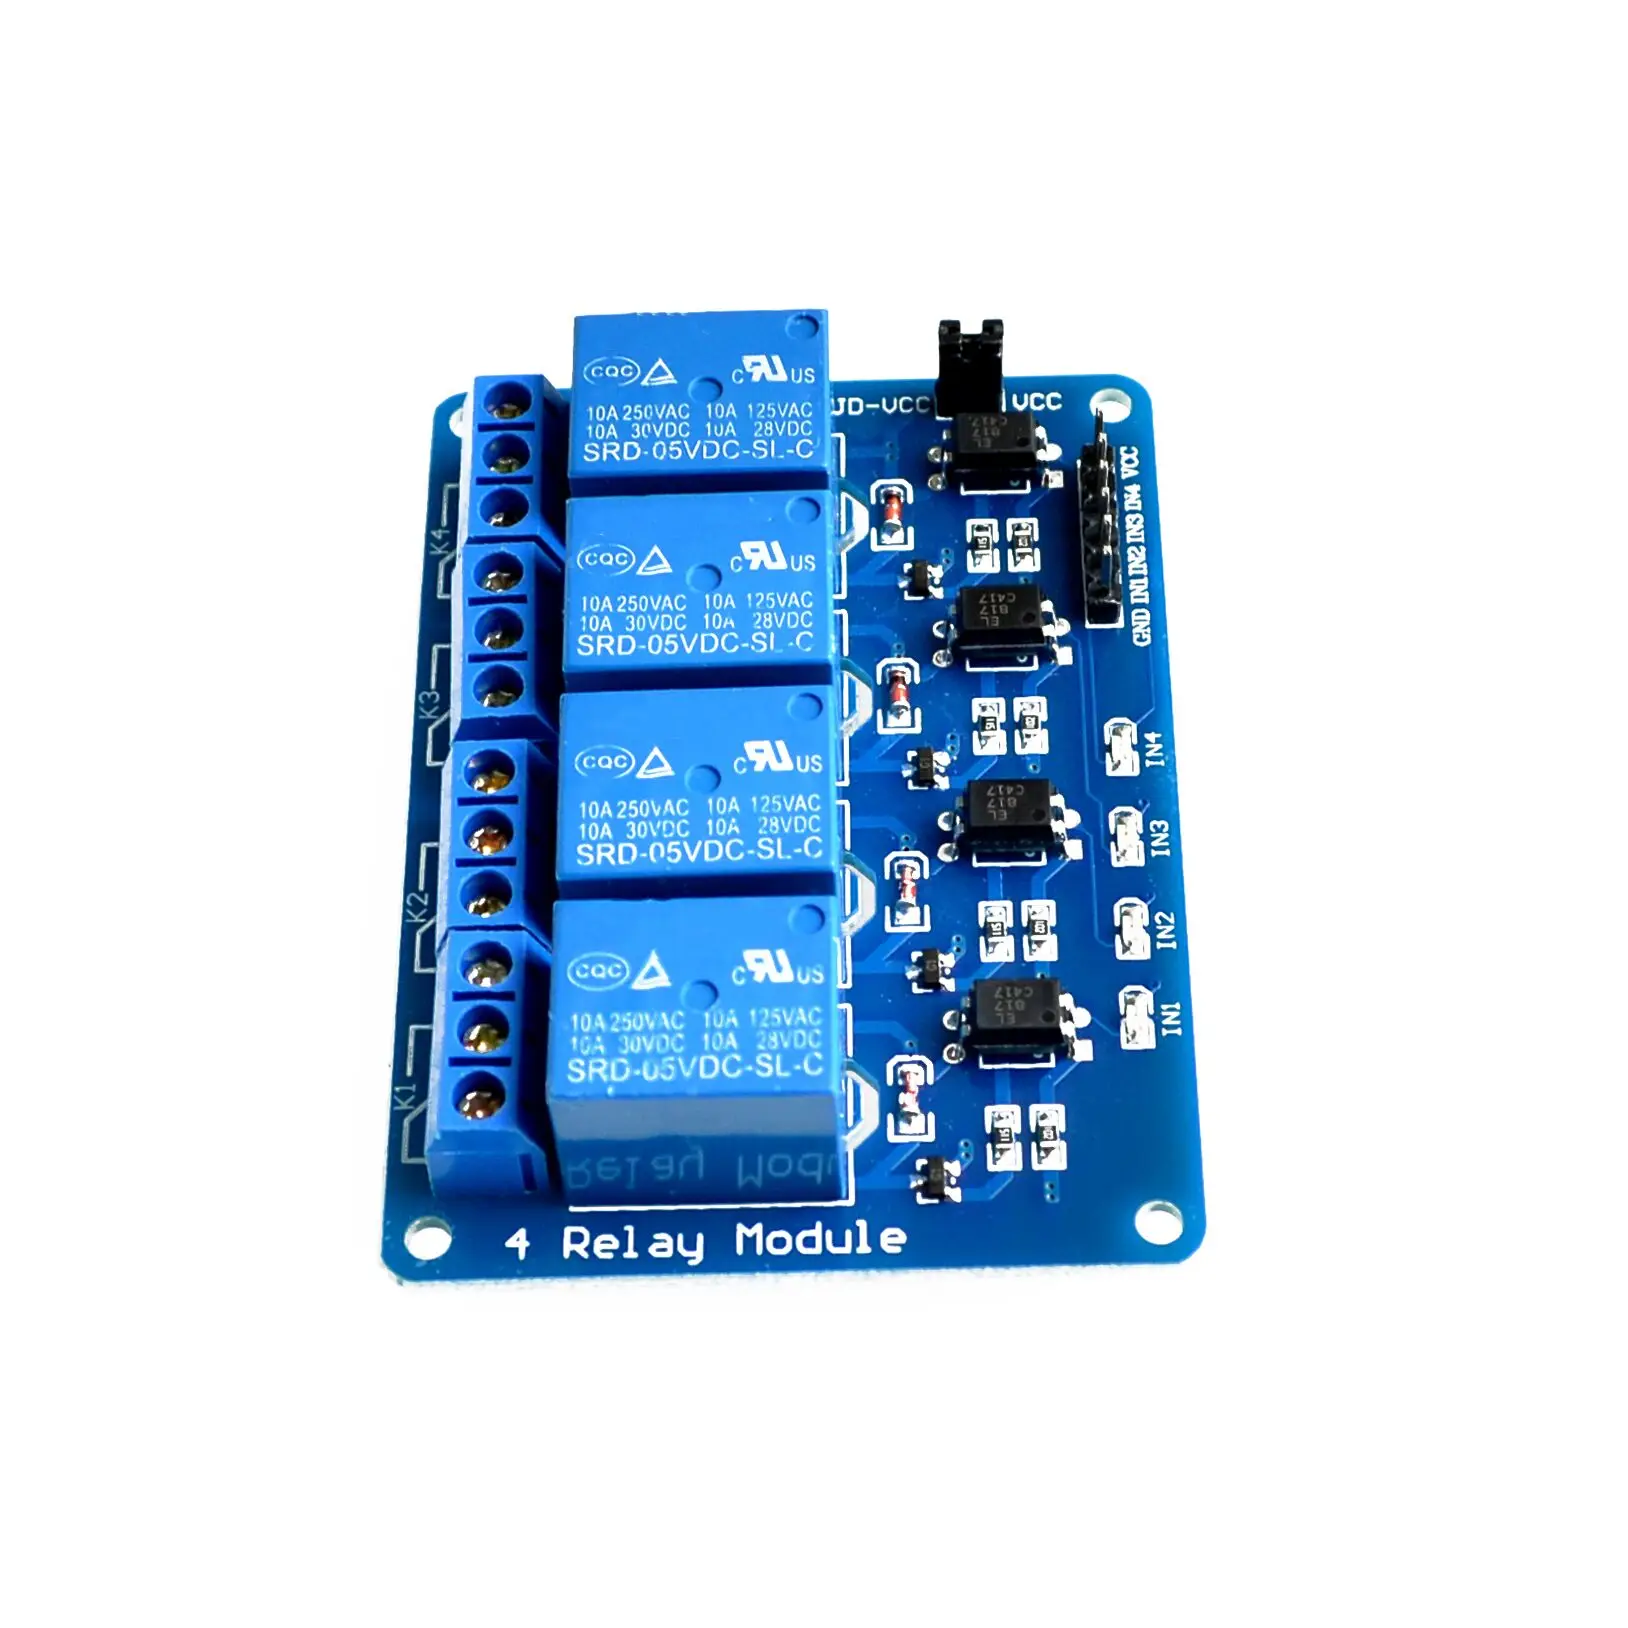 

Brand New 5V 4 Channel Relay Module for Arduino PIC ARM DSP AVR Raspberry Pi